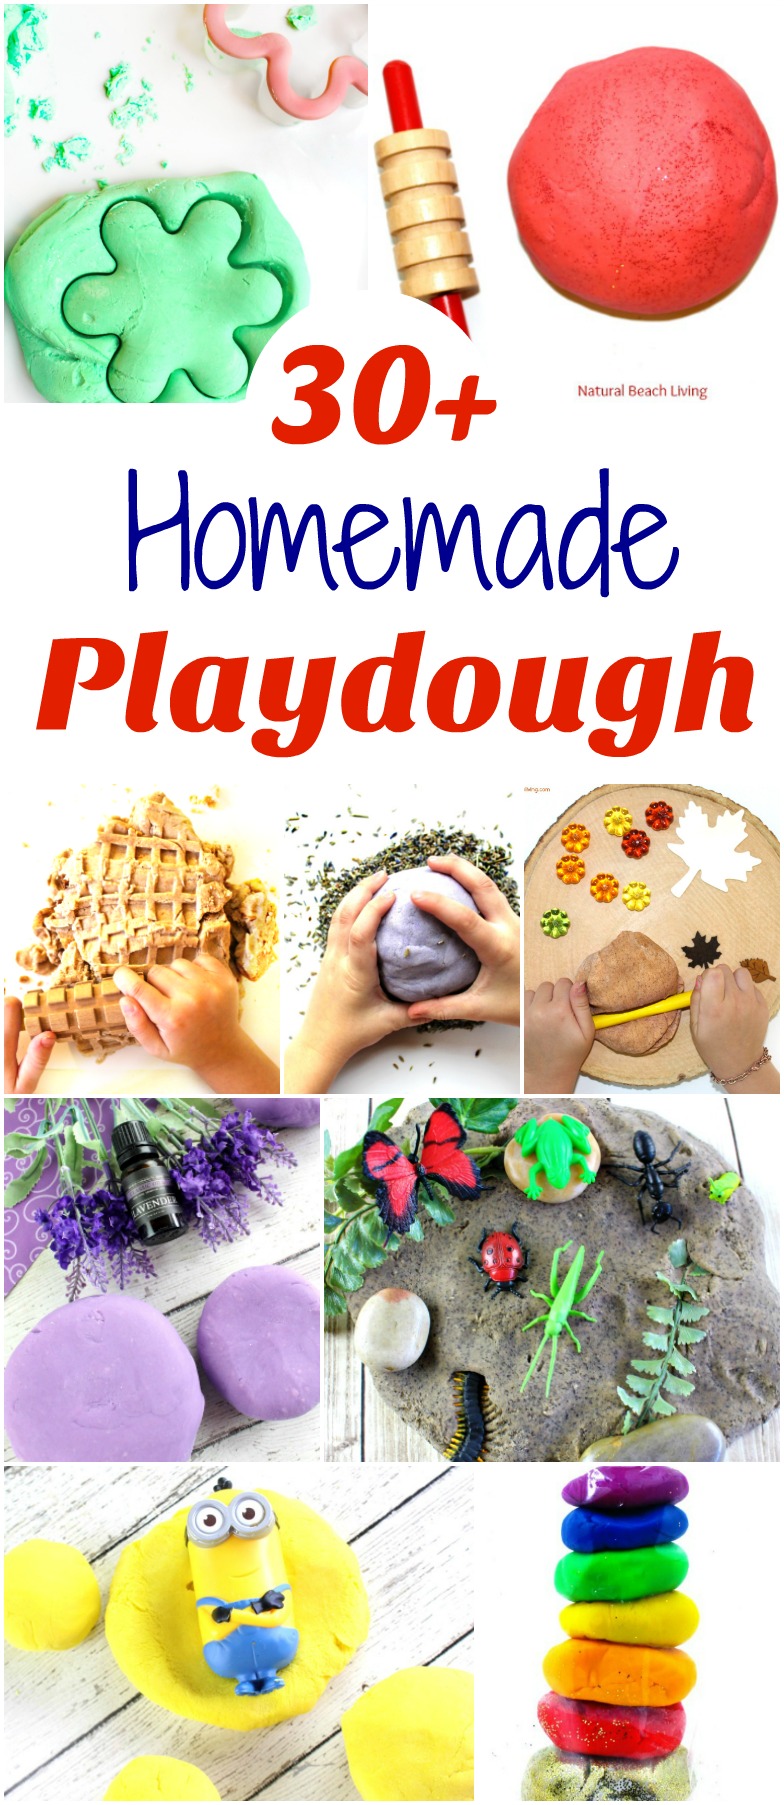 25+ Homemade Putty Recipes, Putty Recipes, How to Make Putty, Silly Putty Recipe, Therapy Putty Recipe, Edible Putty, Putty is a great tool for keeping your children focused and on working fine motor skills. All you need is a few simple ingredients, and you'll have a homemade putty everyone will want to play with. 